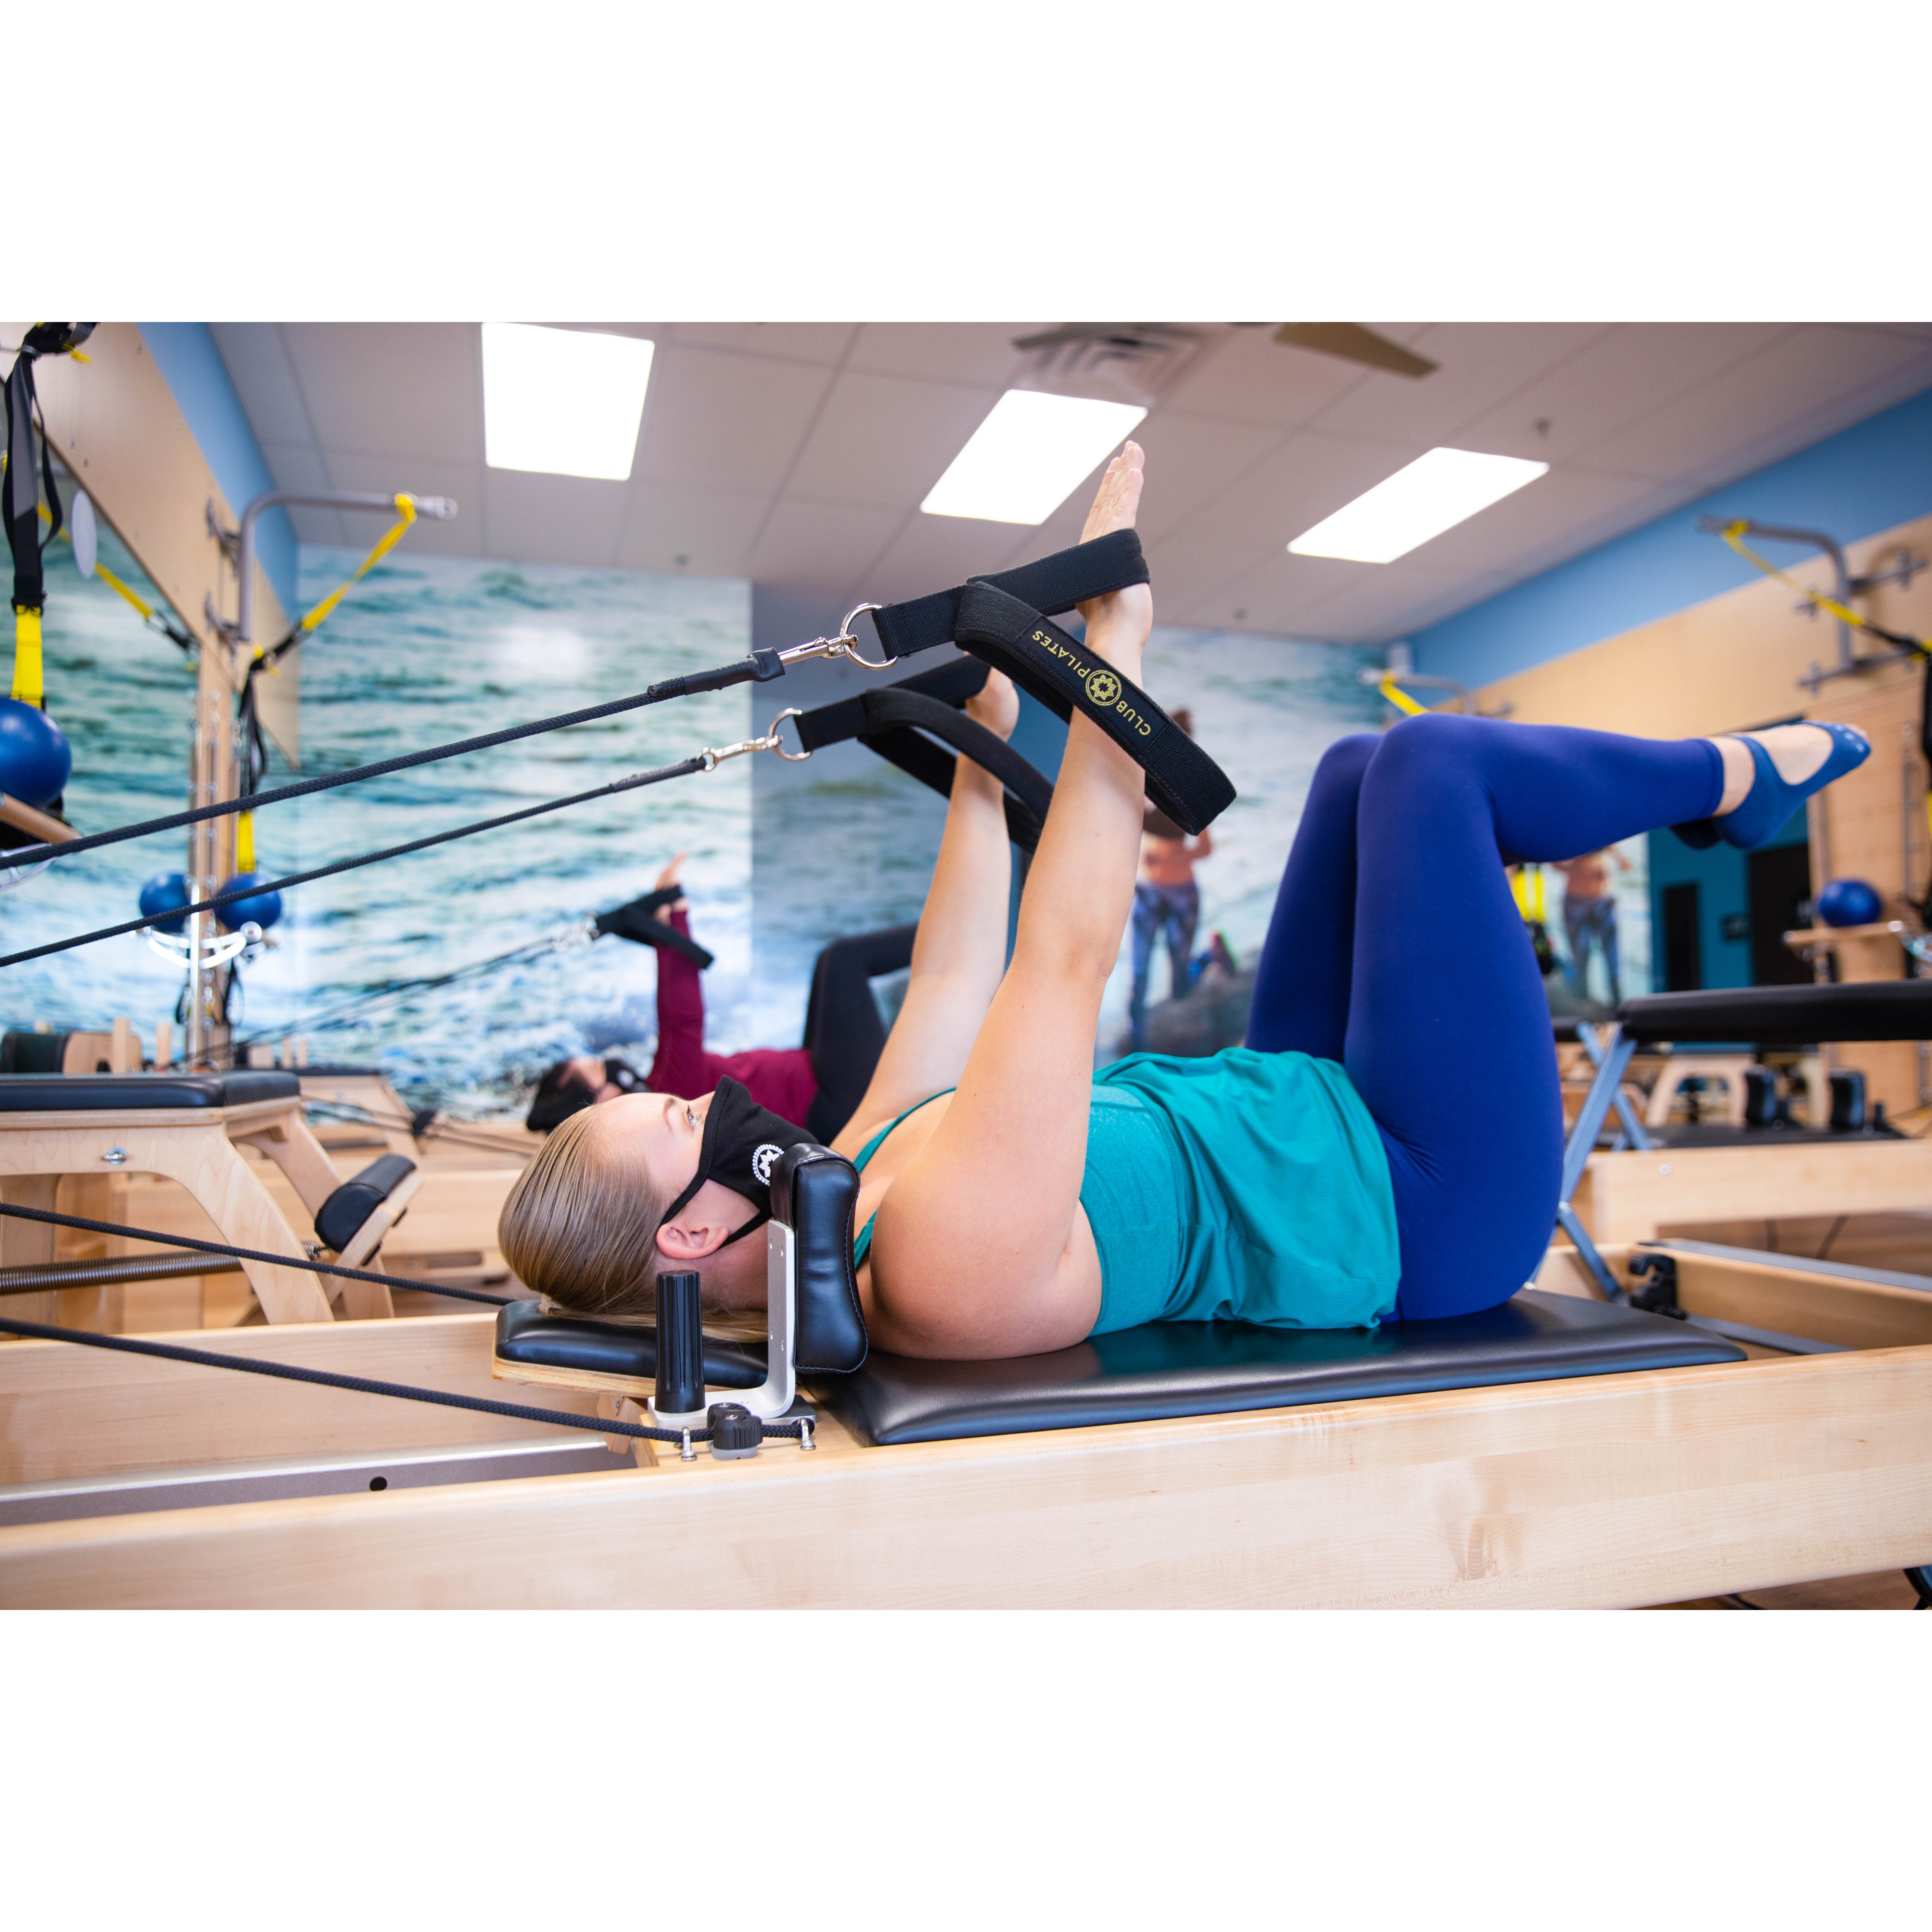 Club Pilates Prices: How Much Does a Membership Cost